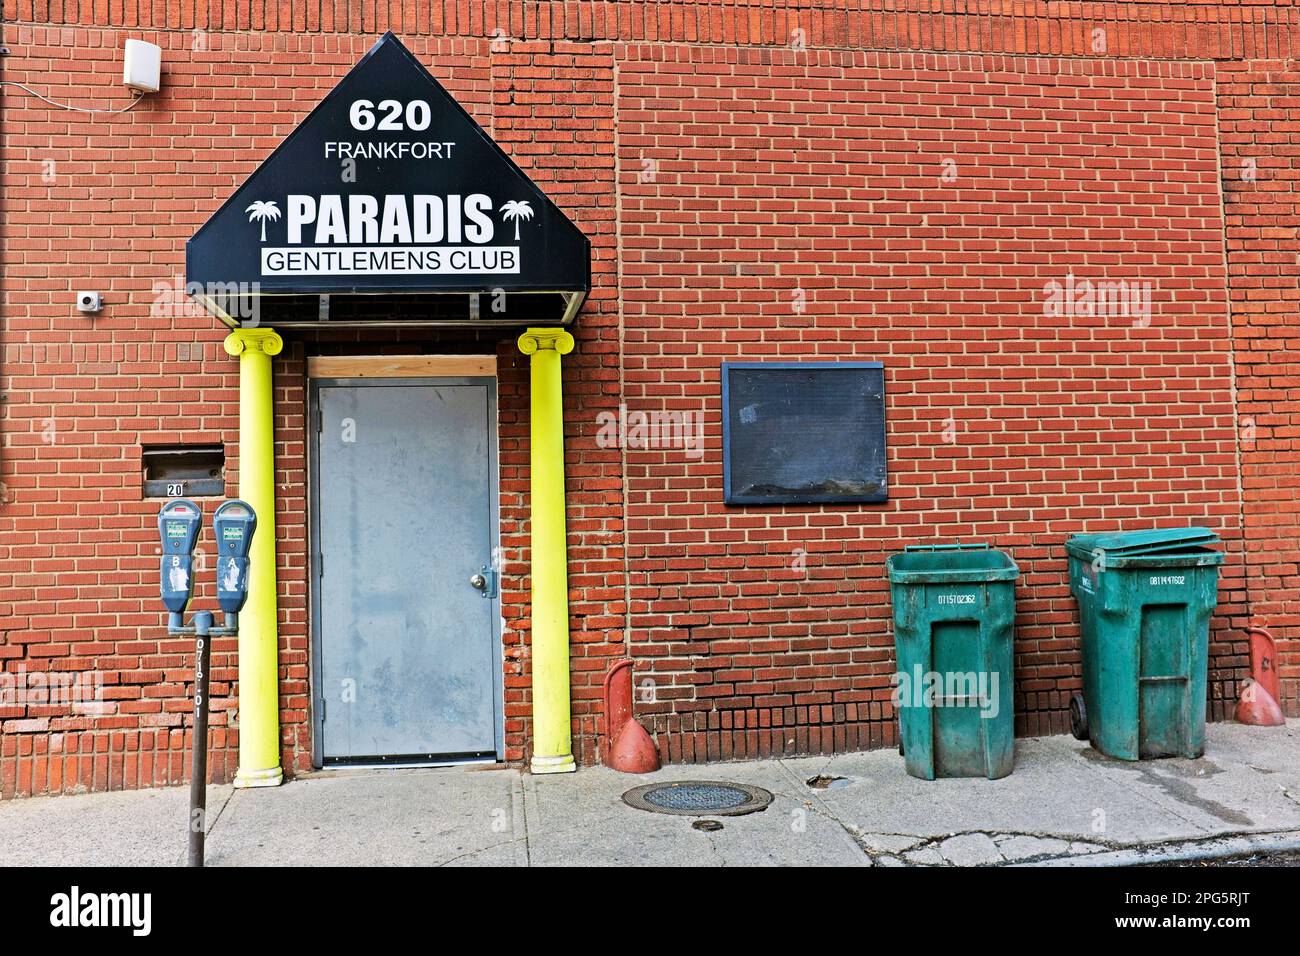 Paradis Gentlemen's Club is an adult entertainment venue on Frankfort Ave. in the Warehouse District in downtown Cleveland, Ohio, USA. Stock Photo